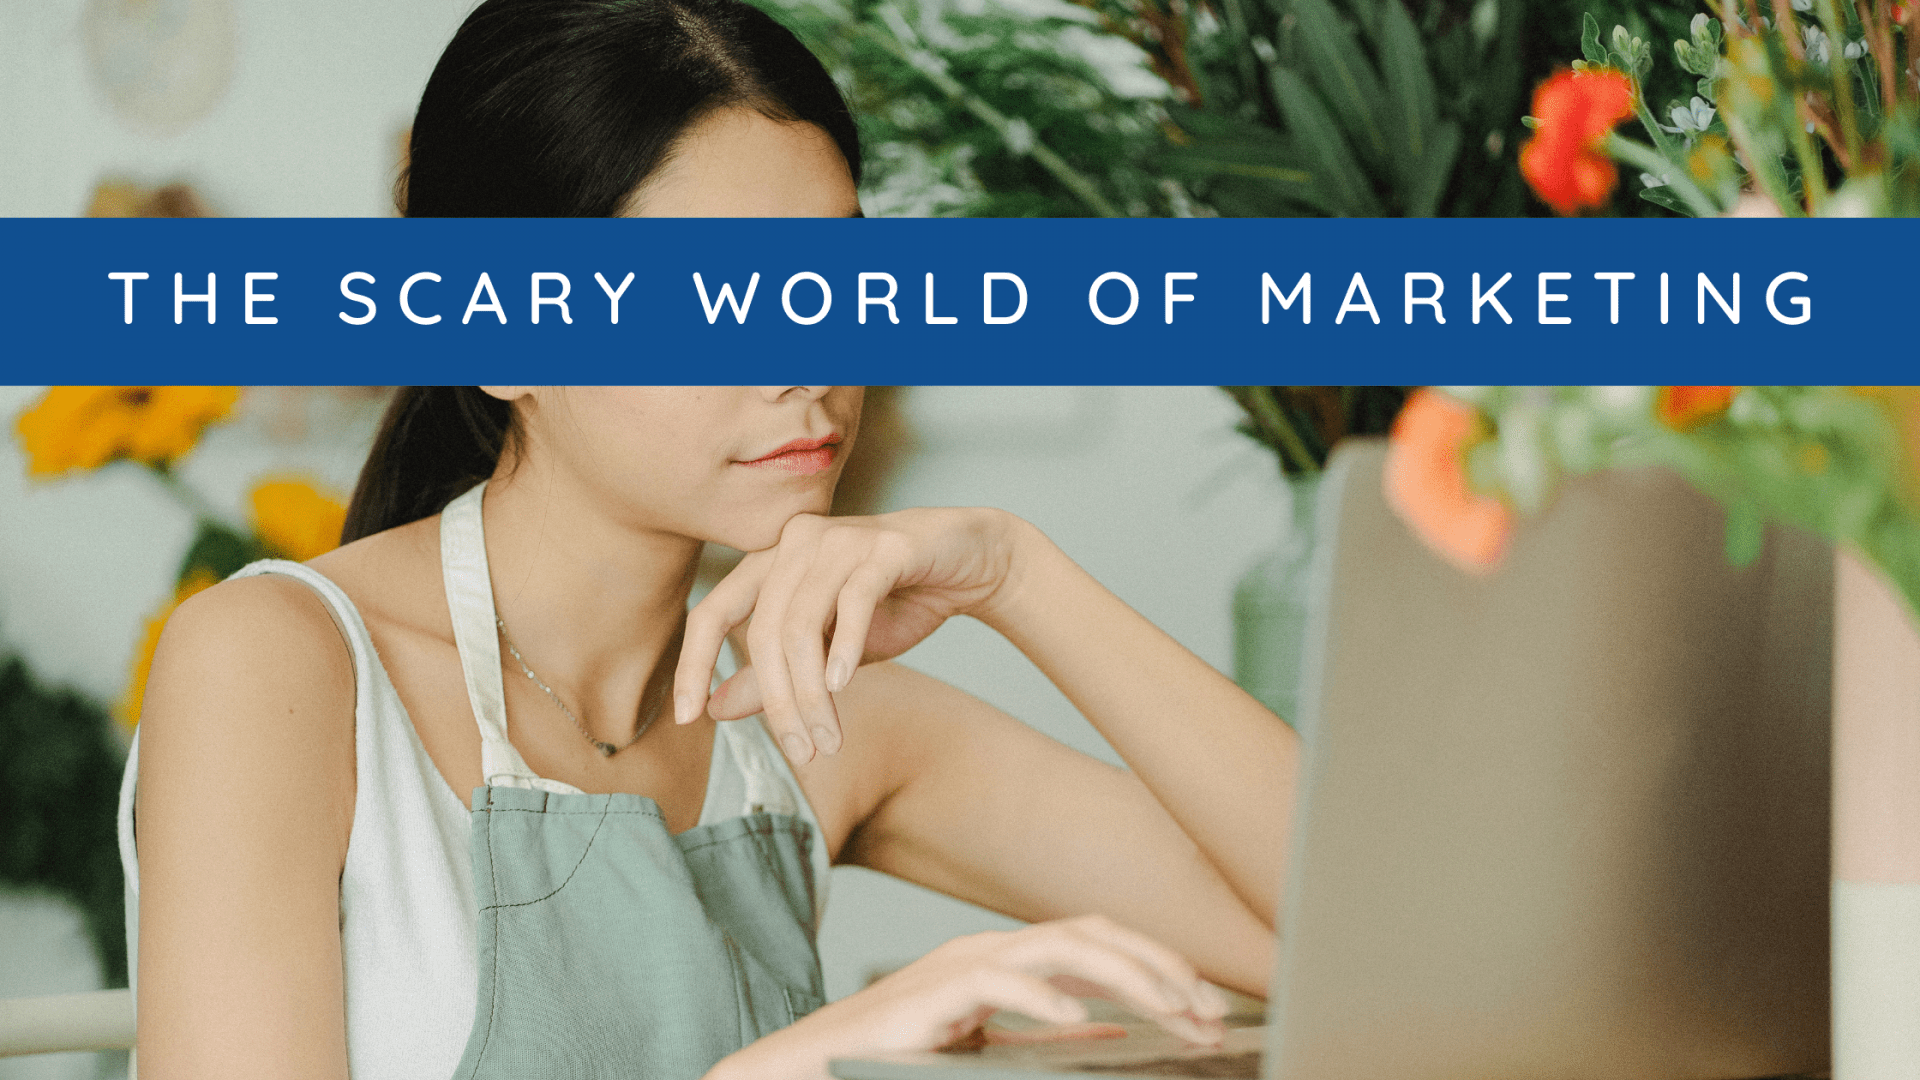 The scary world of marketing